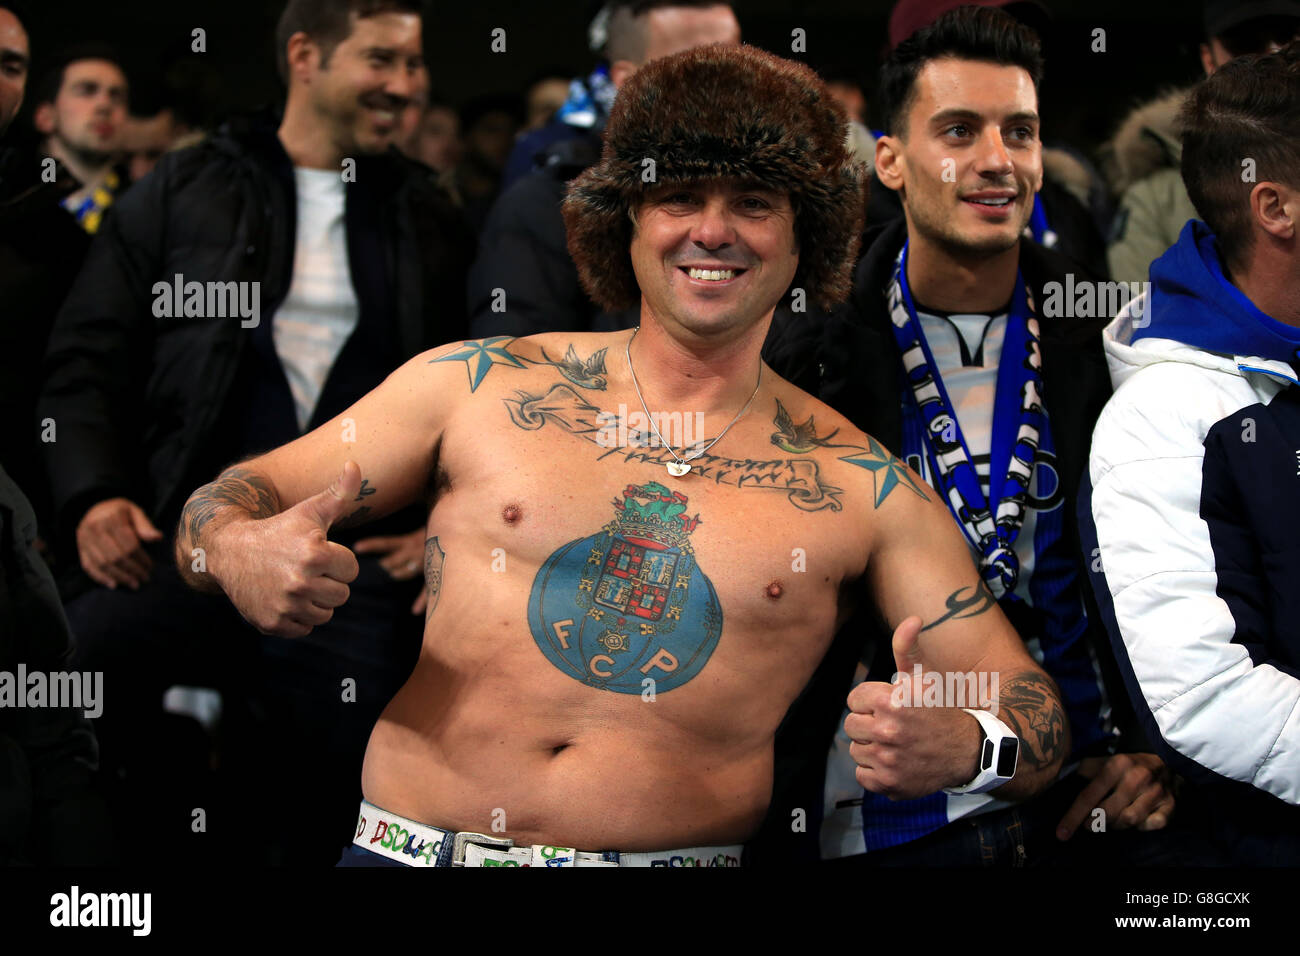 A Porto fan with the club badge tattooed on his stomach during the UEFA Champions League match at Stamford Bridge, London. Stock Photo